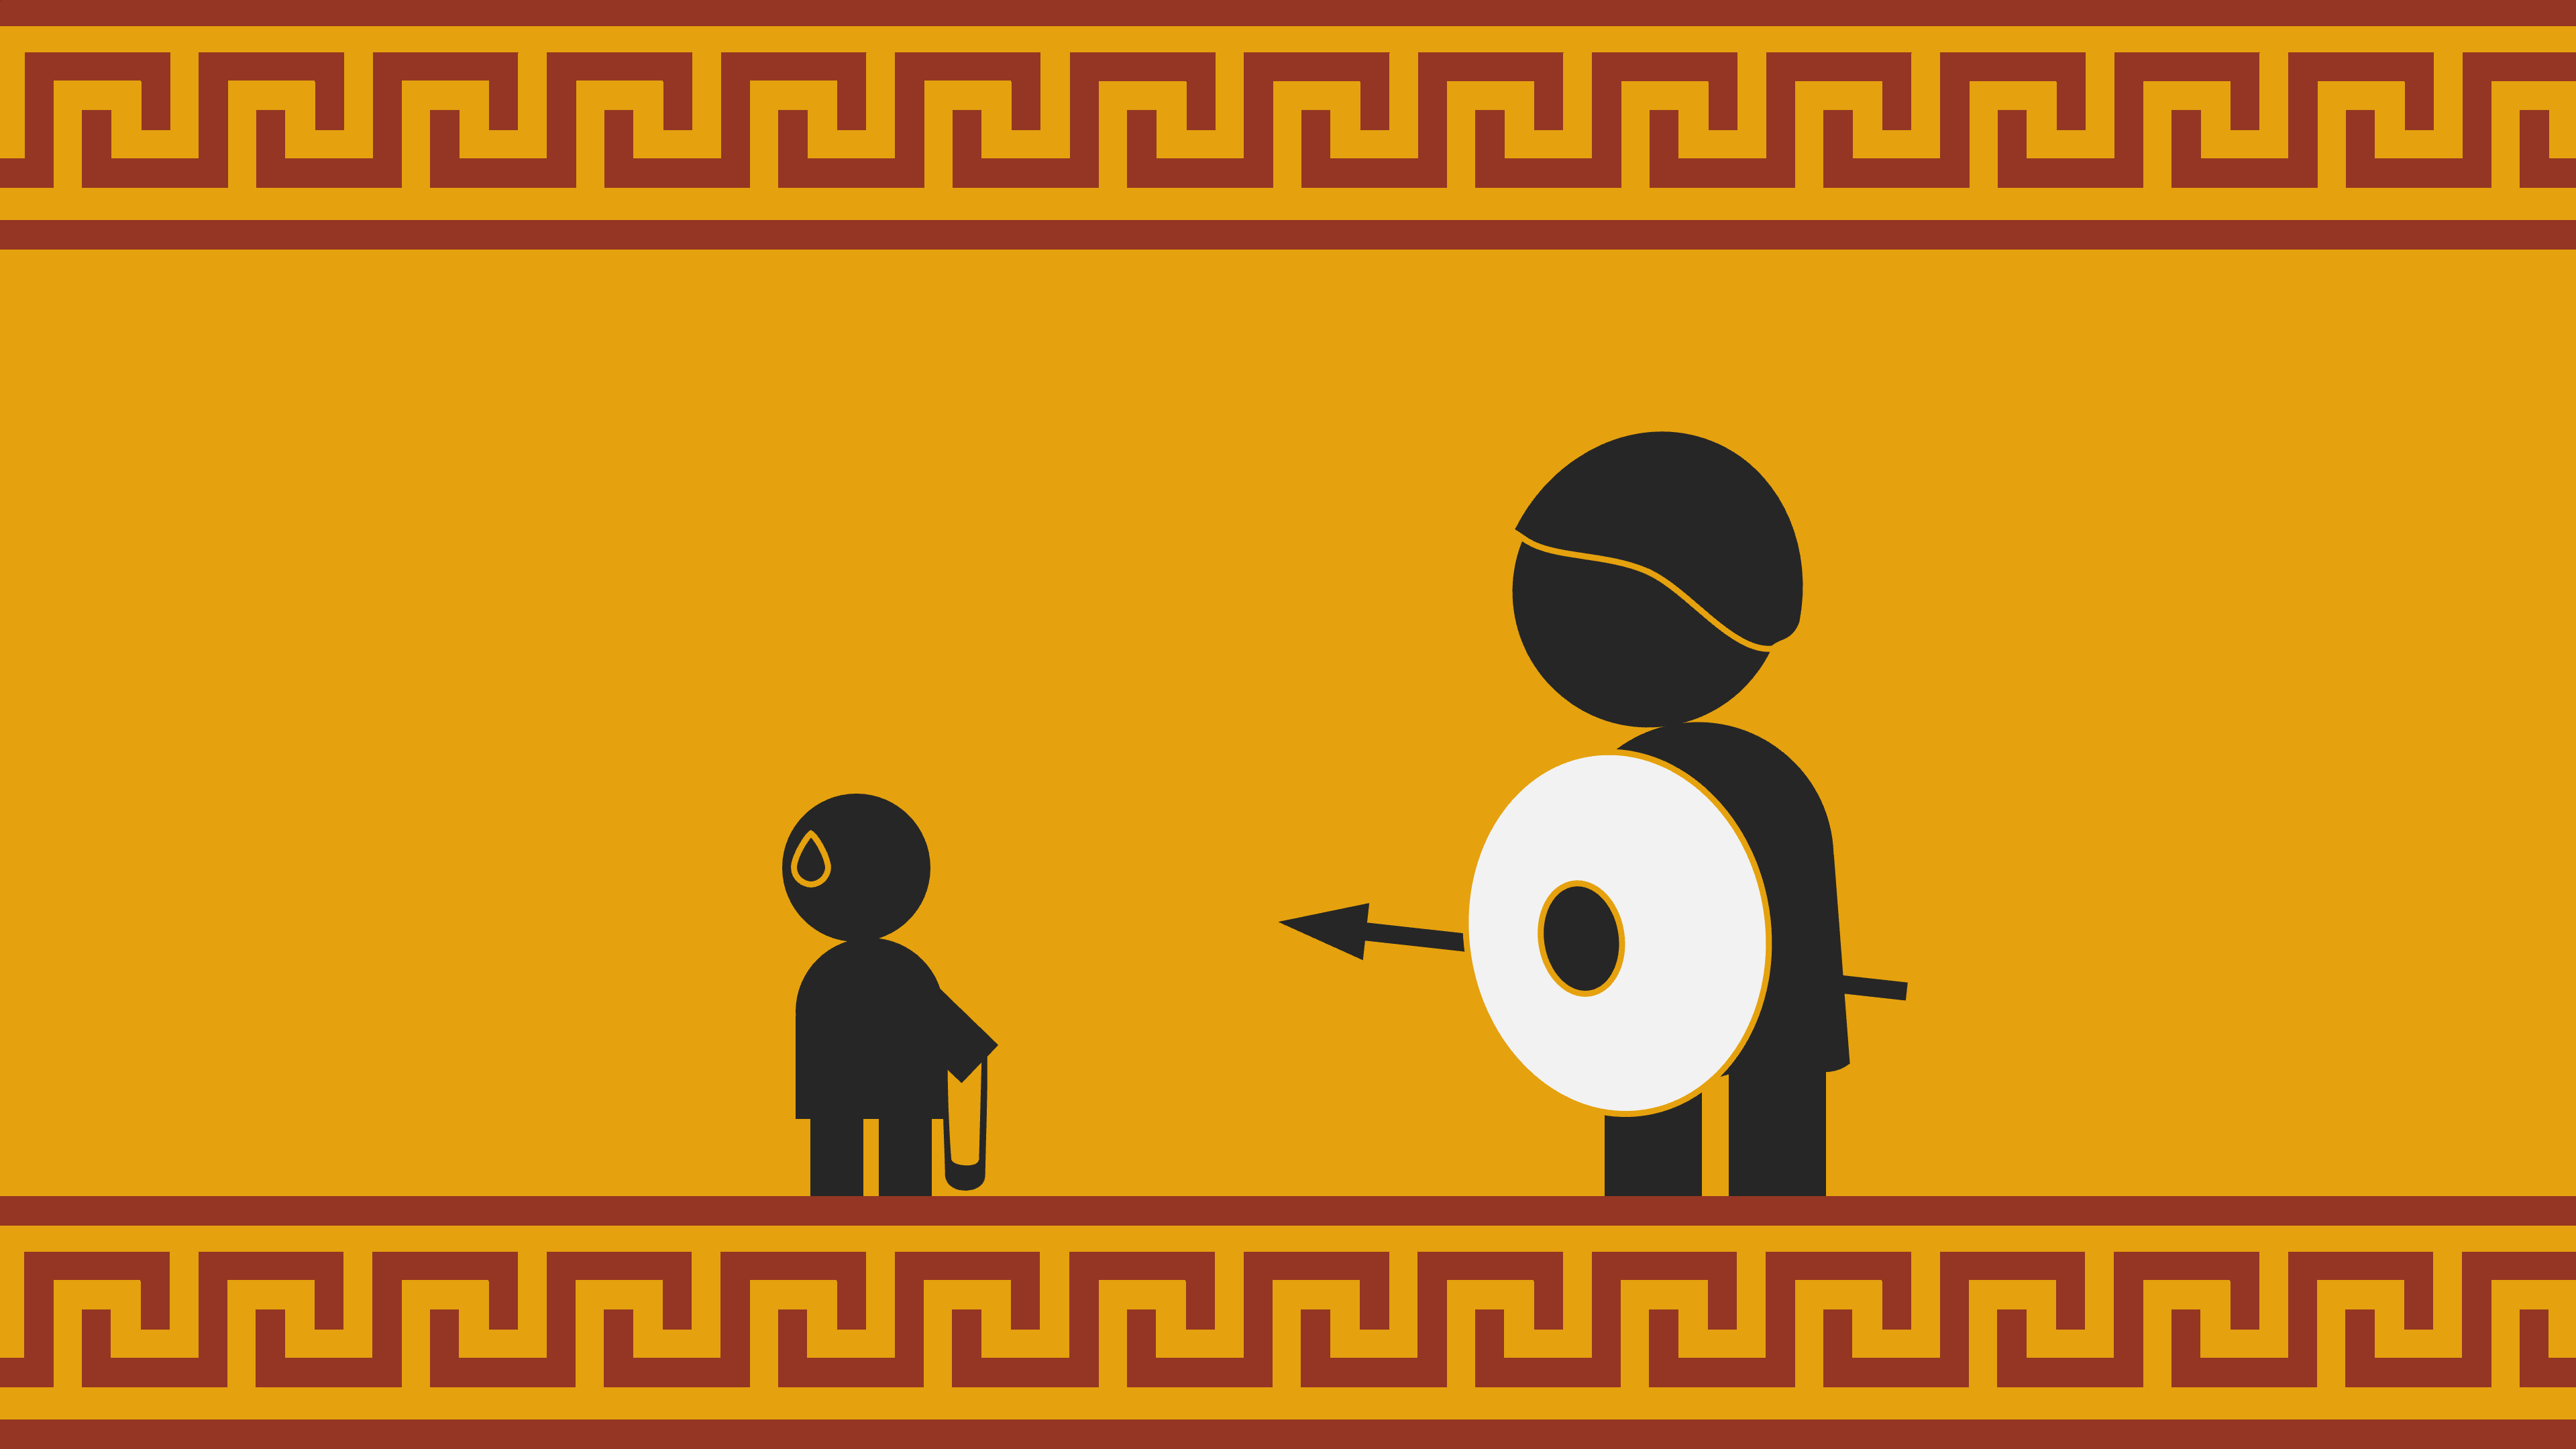 David versus Goliath in the style of an ancient Greek vase